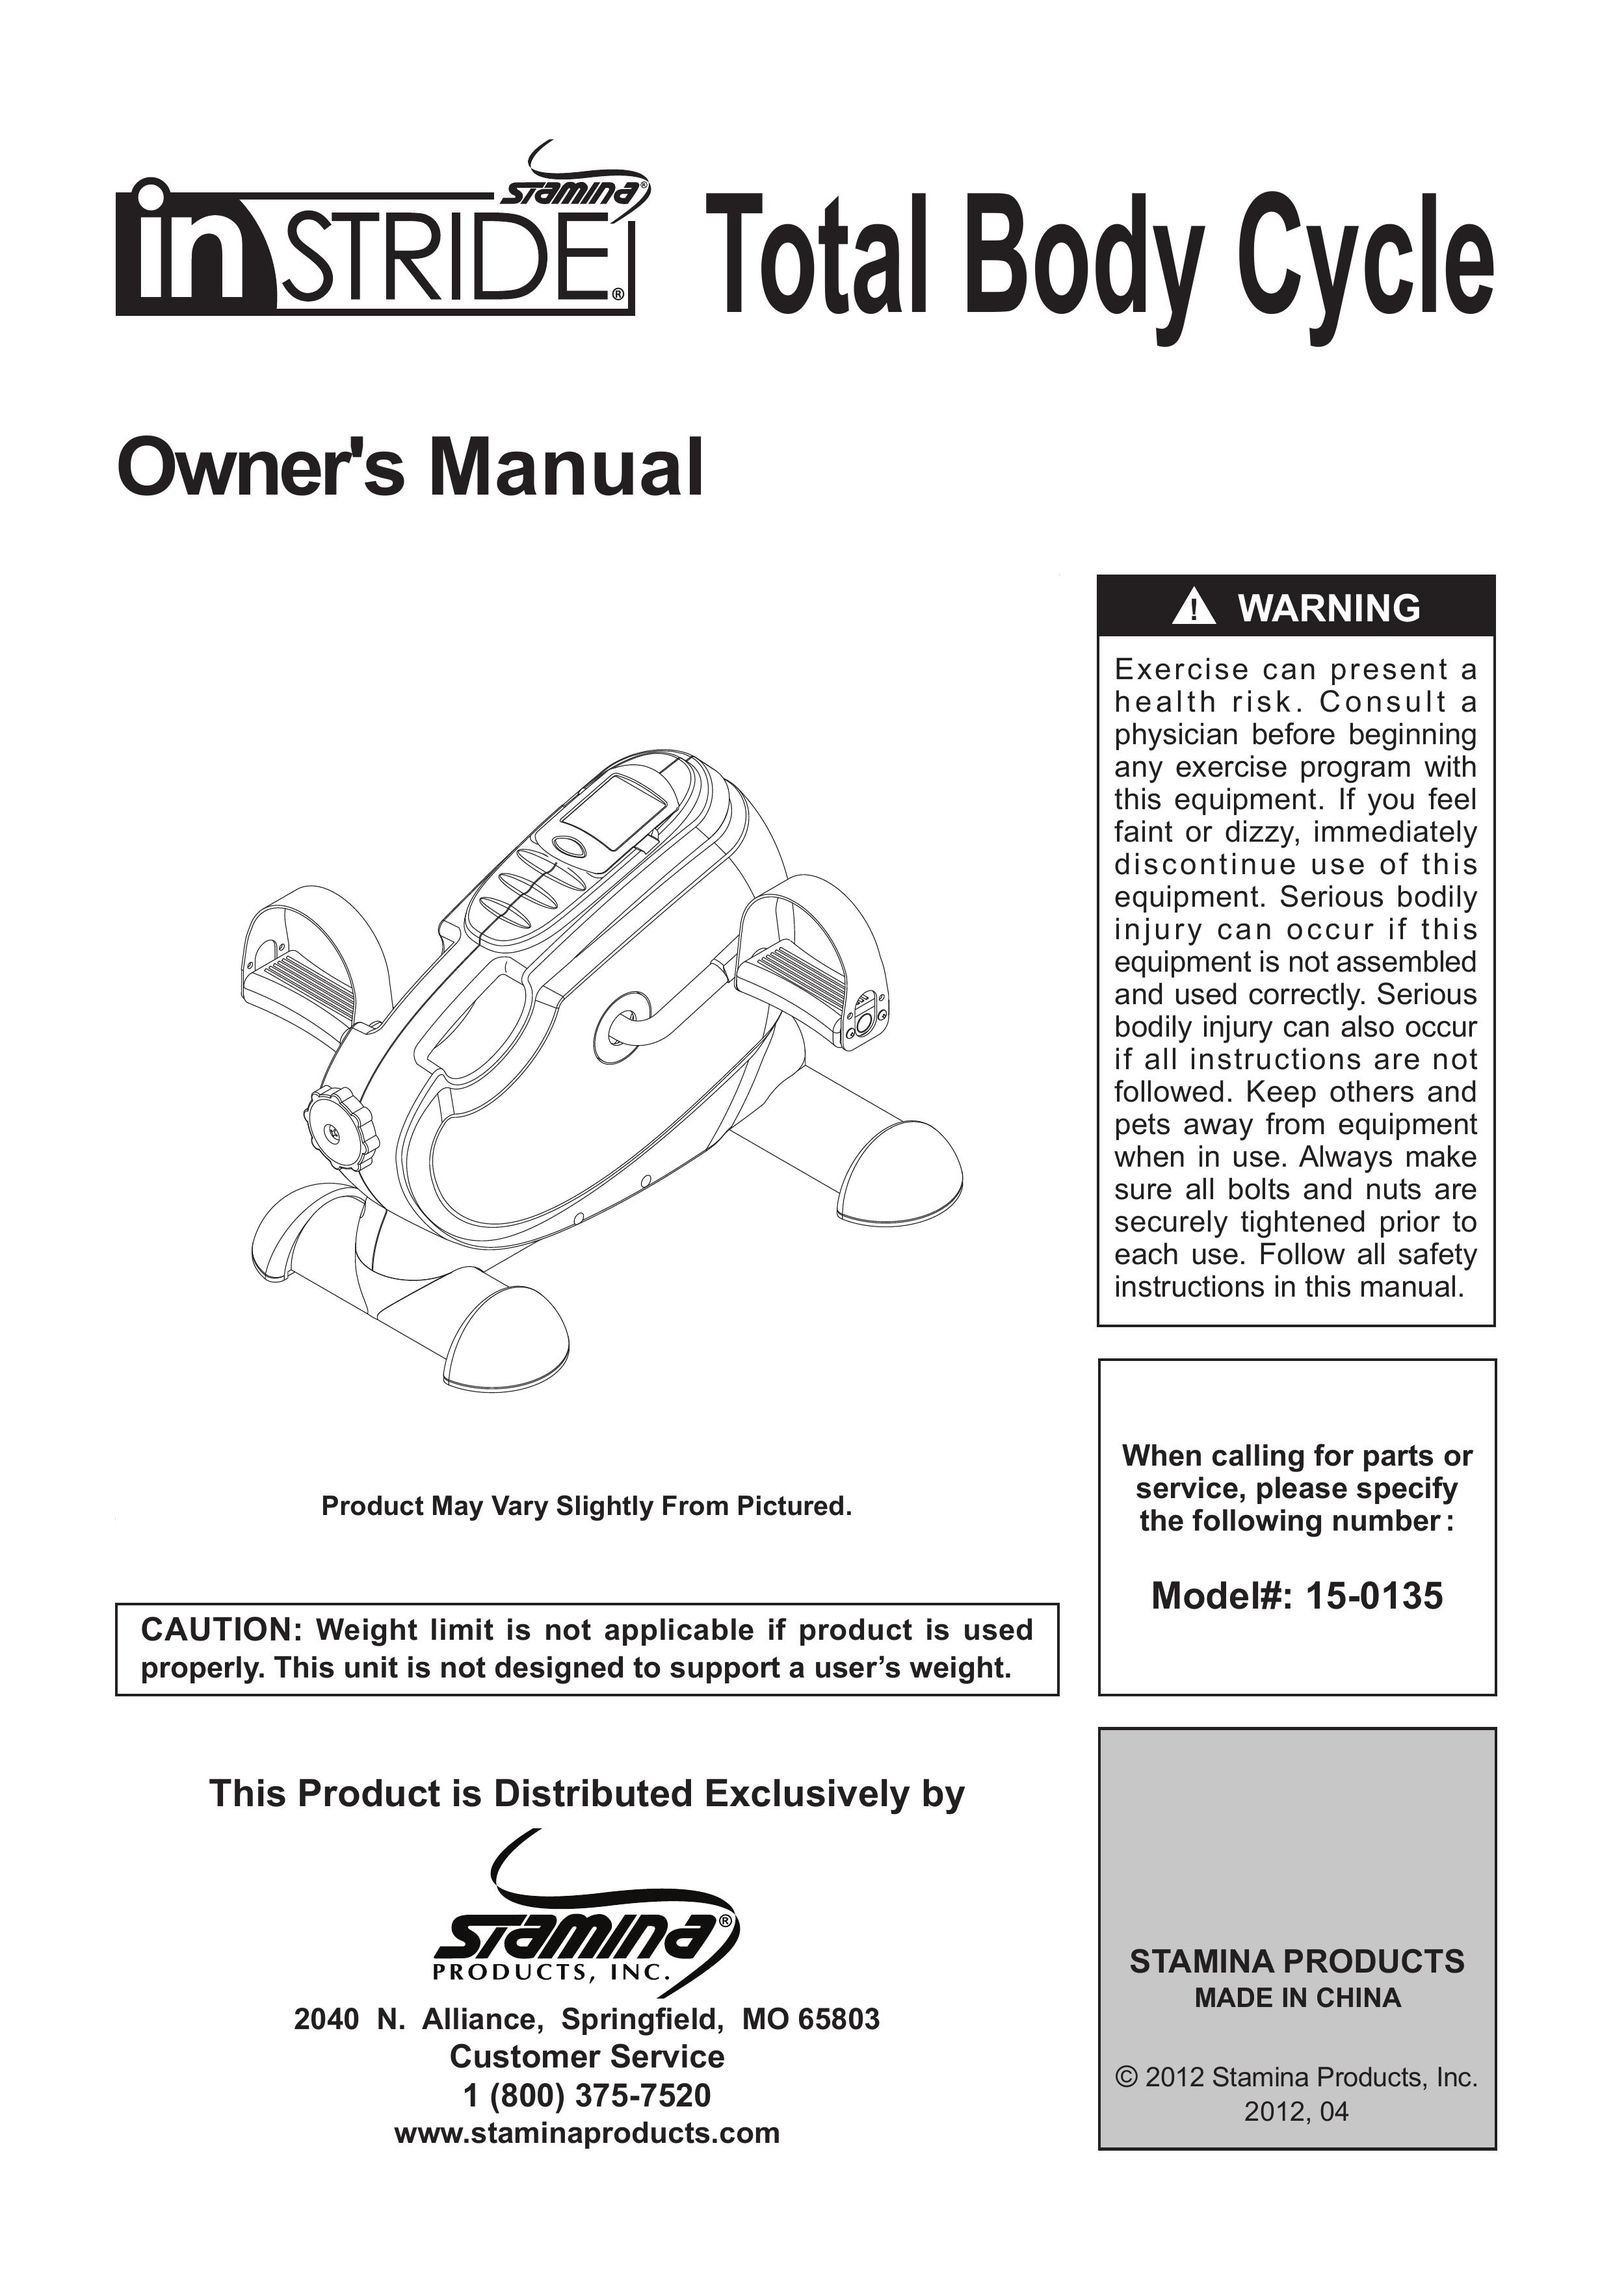 Stamina Products 15-0135 Exercise Bike User Manual